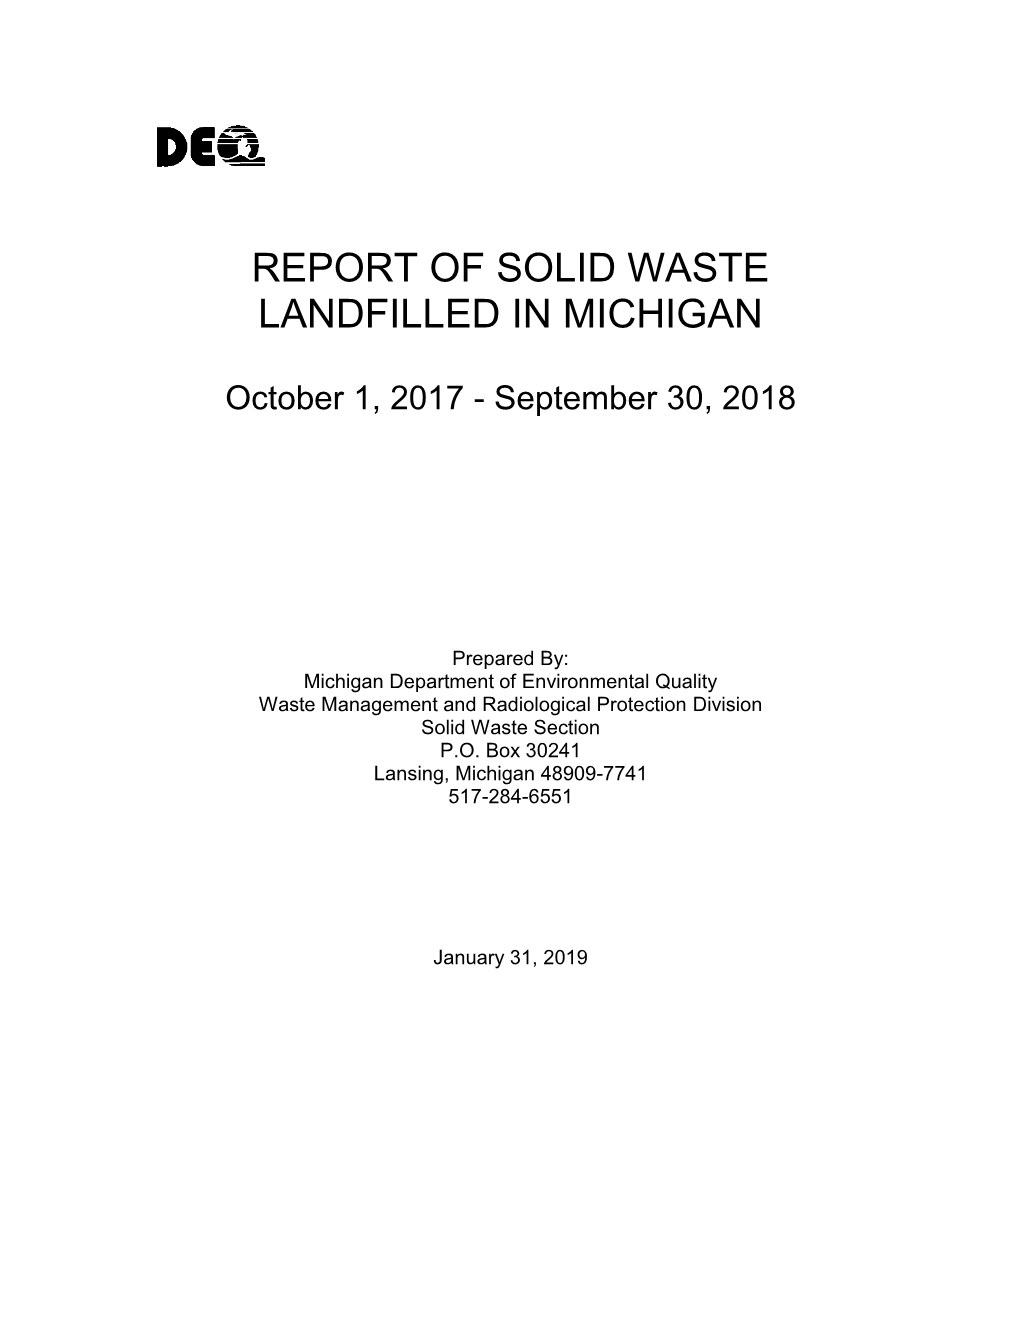 2018 Report on Solid Waste Landfilled in Michigan